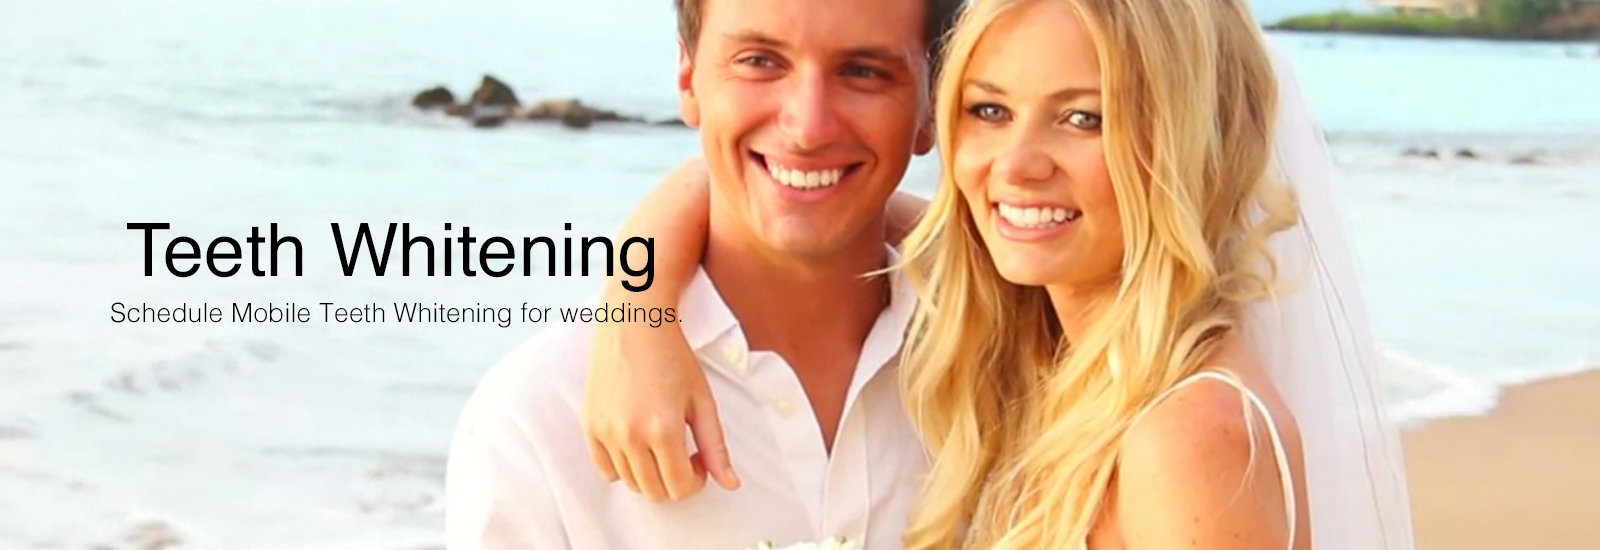 Wedding Video With Whitened Teeth